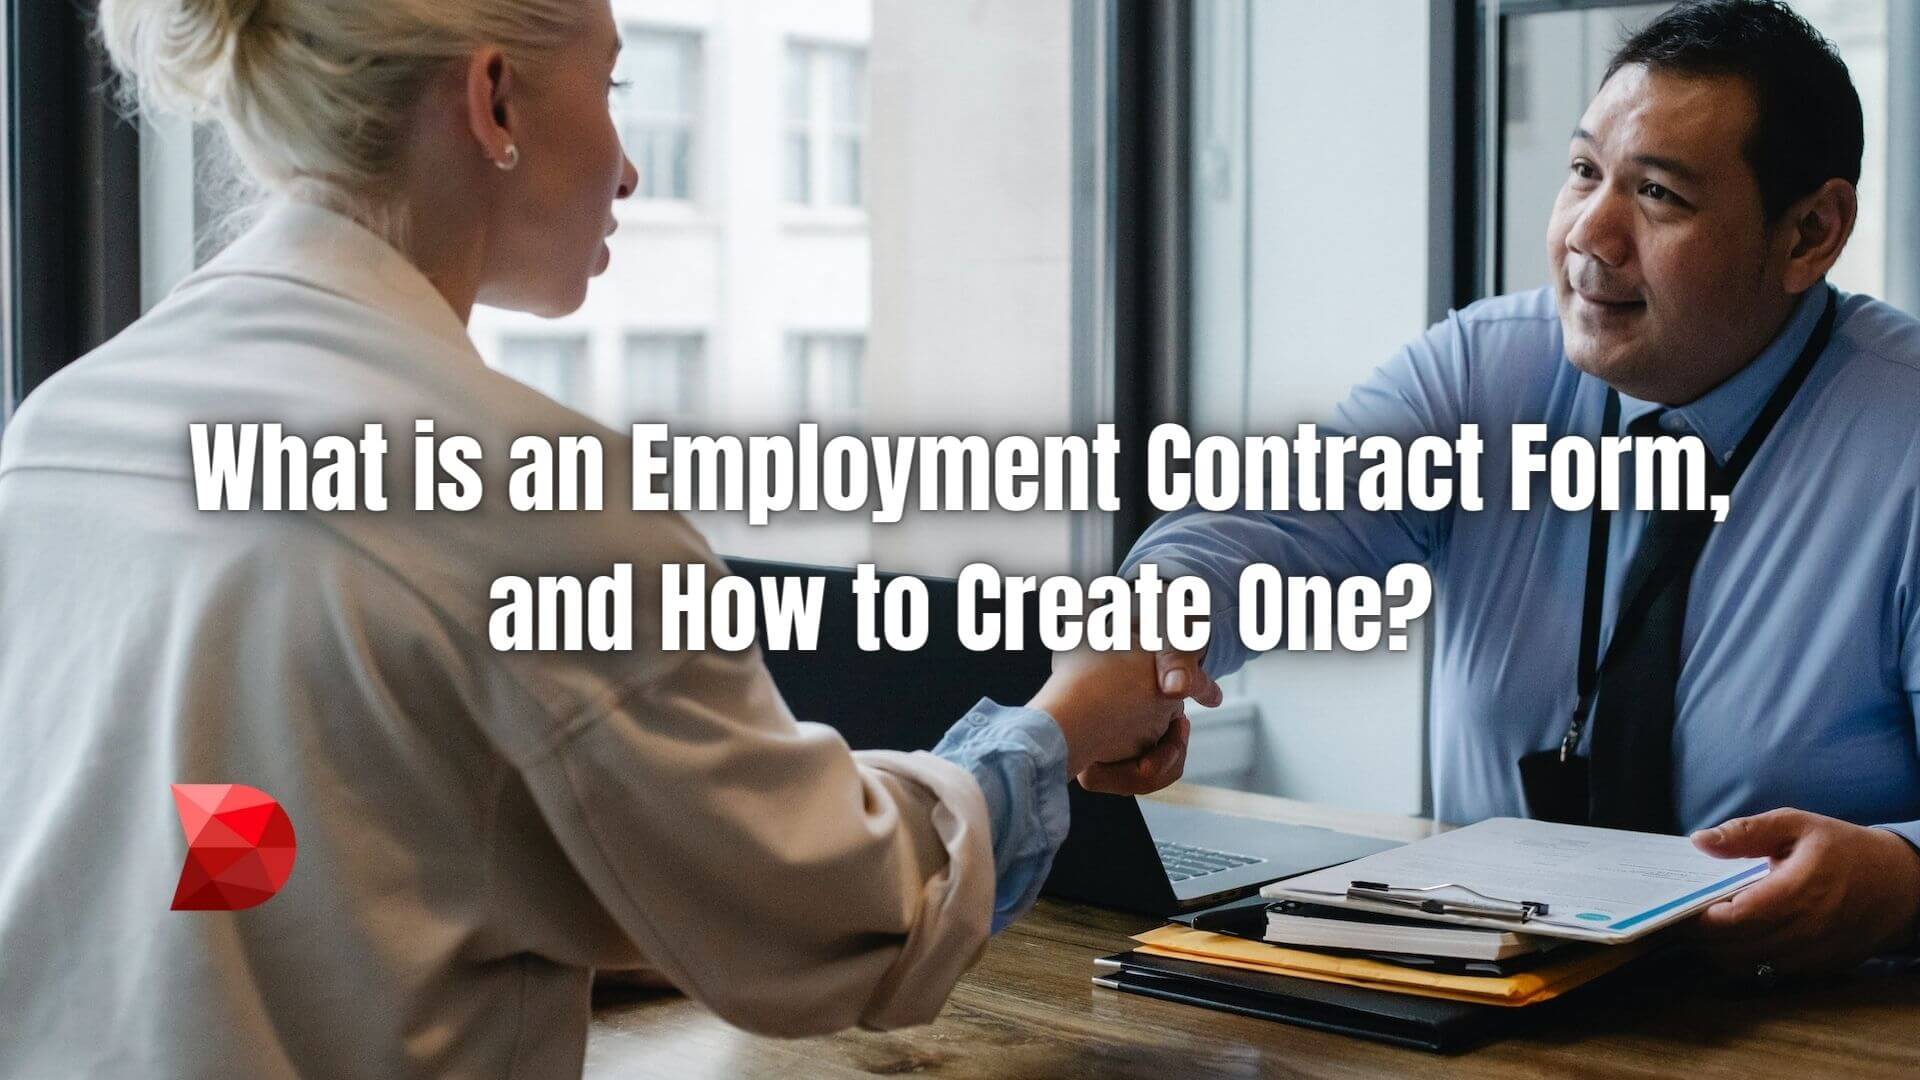 An Employment Contract Form is an agreement between an employer and an employee that outlines the expectations of both parties. Learn more!